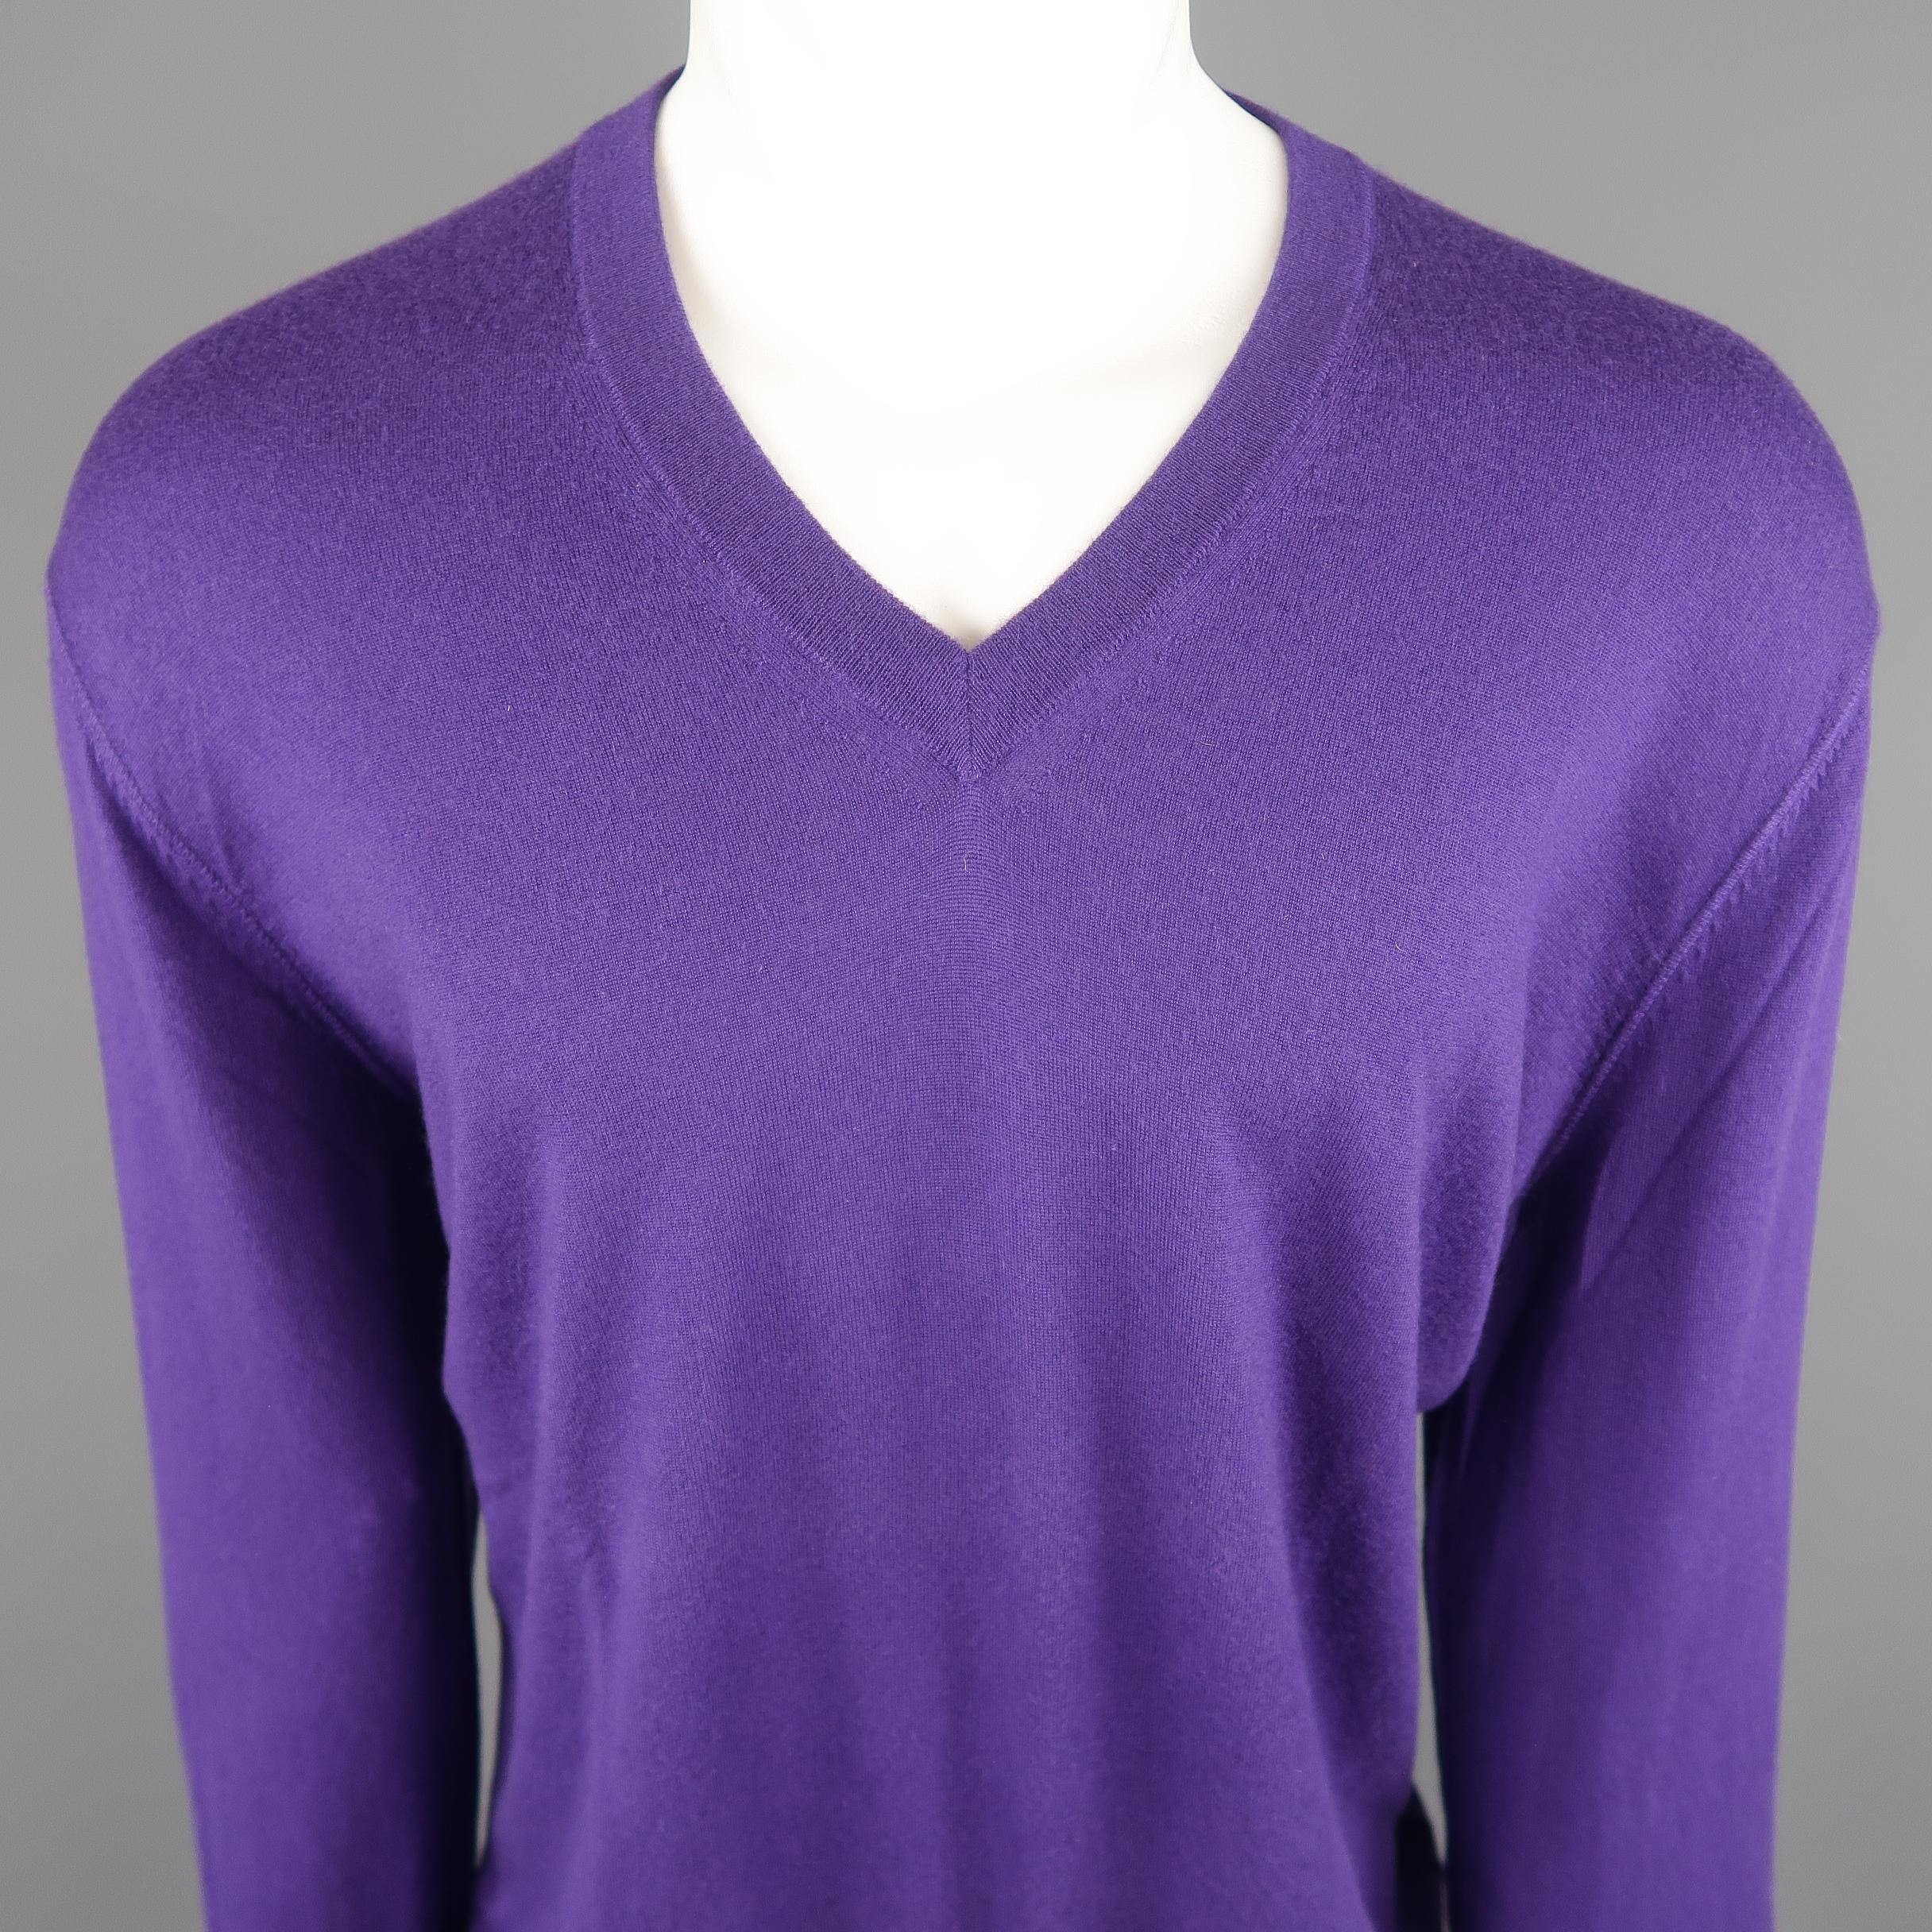 Stephen Kempson Size XXL pullover come in Cashmere in a purple tone knit, with a V-neck, and ribbed cuff and waistband. Made in England.
 
Good Pre-Owned Condition.
Marked: XXL
 
Measurements:
 
Shoulder: 21 in.
Chest: 24.5 in.
Sleeve: 30